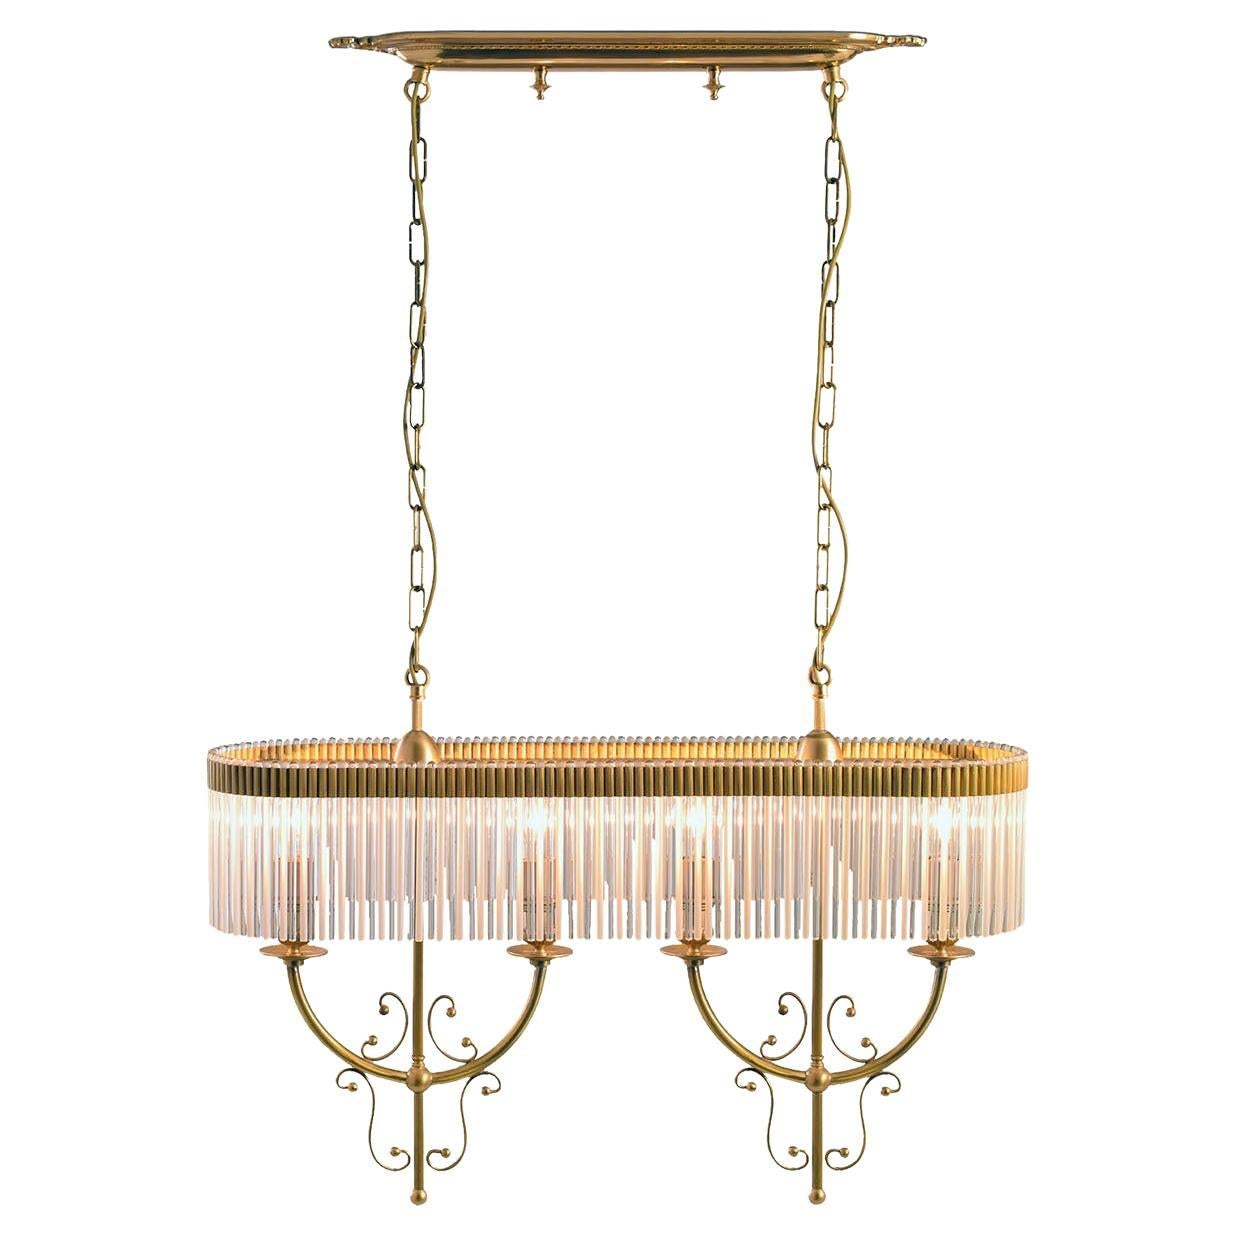 Seicento 4-Light Chandelier by Luca Bussacchini For Sale